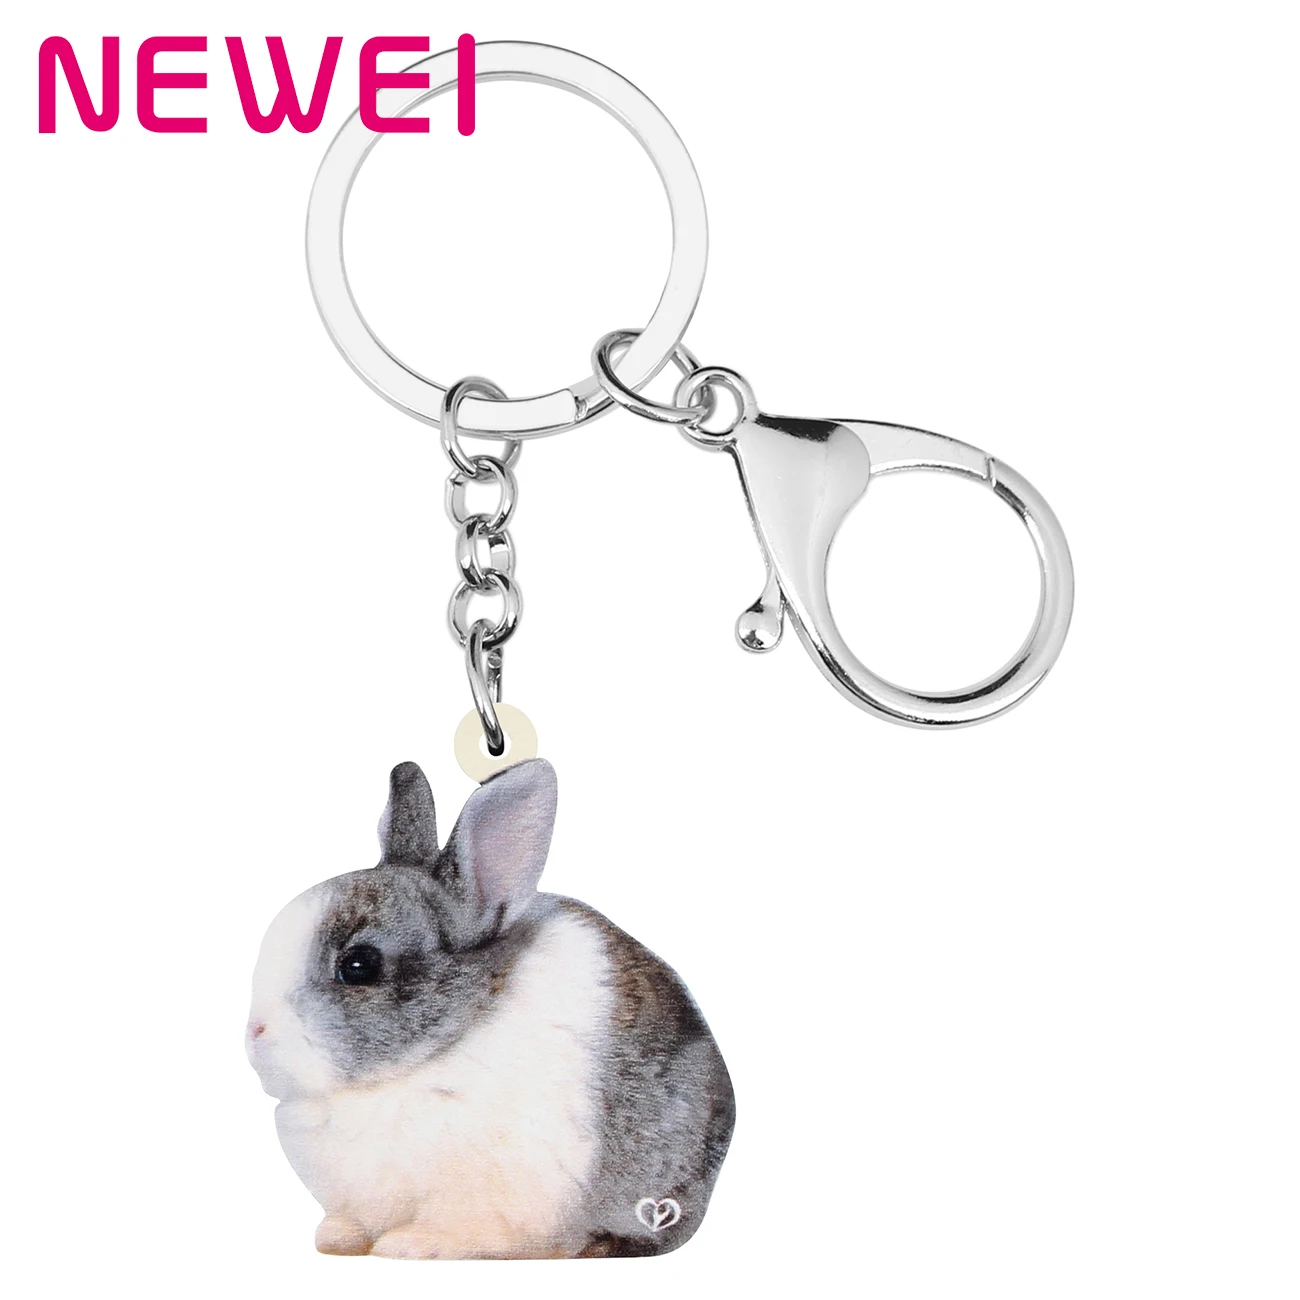 

Newei Acrylic Gray Easter Hare Rabbit Bunny Keychains Pet Animal Keyring Jewelry For Women Kids Festival Gift Bag Car Decoration